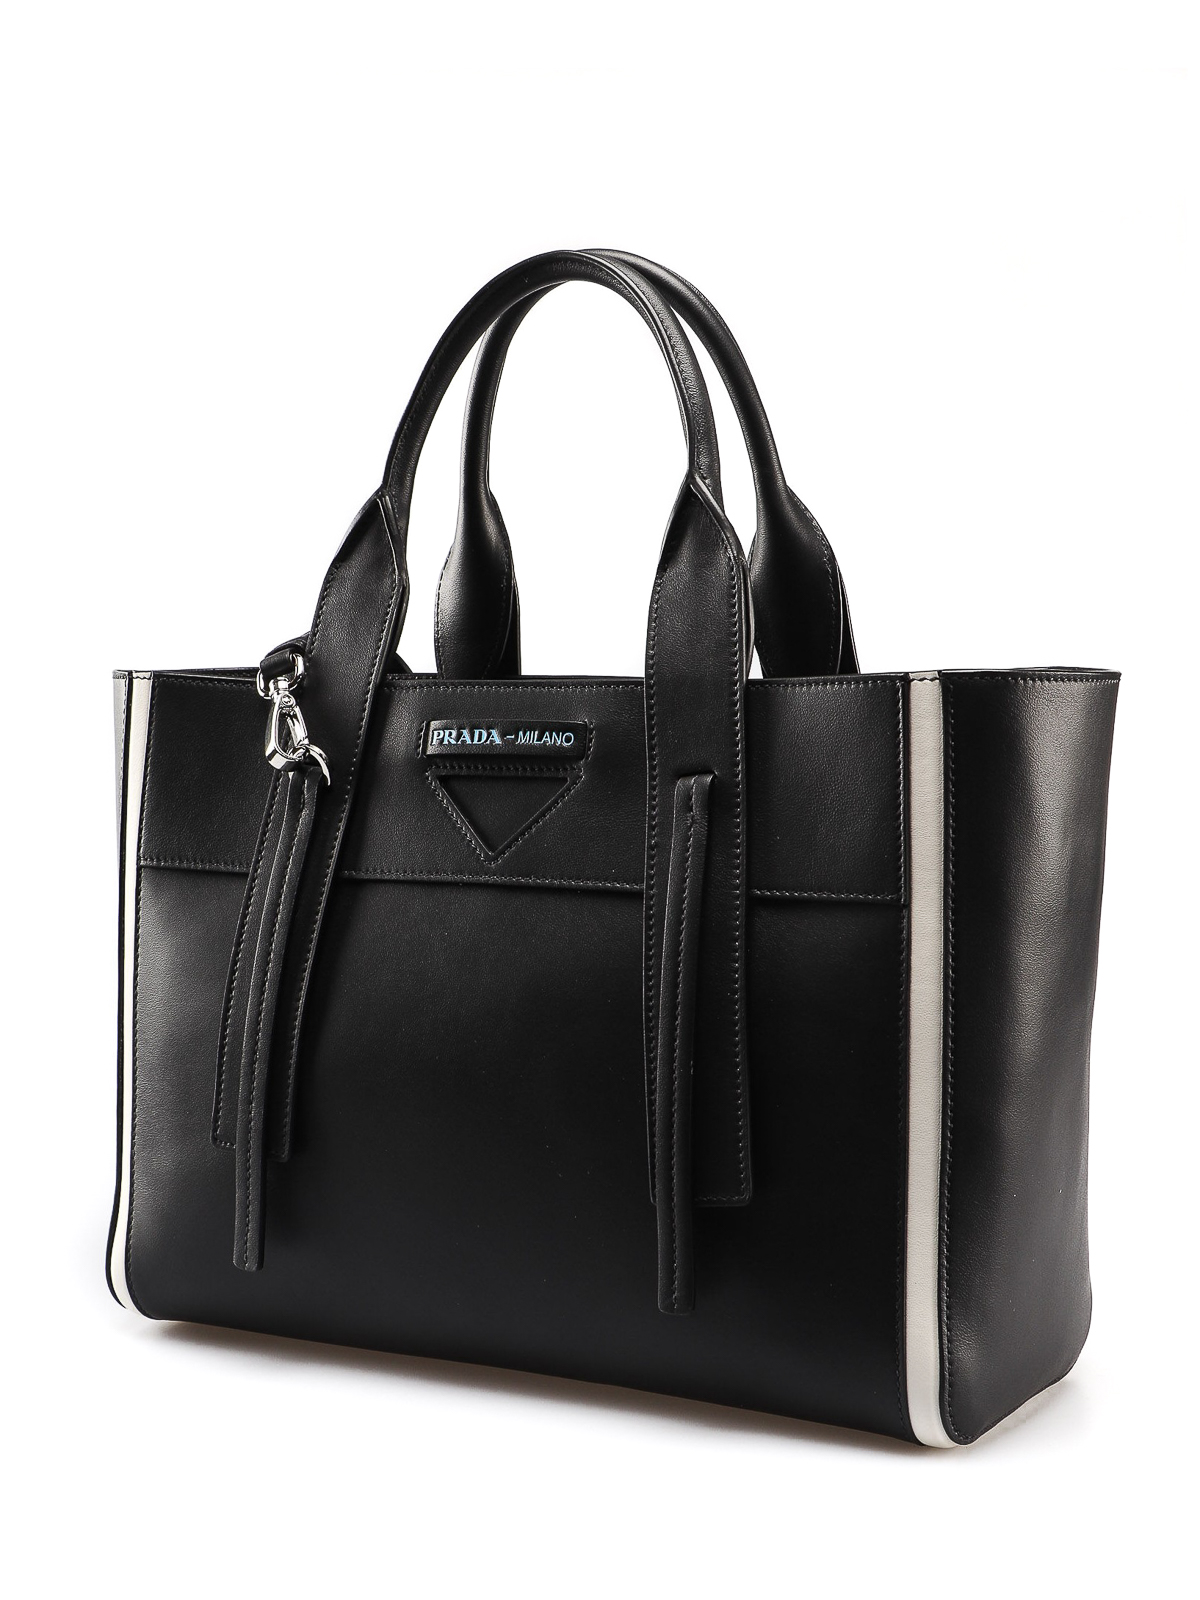 leather tote bag - totes bags 